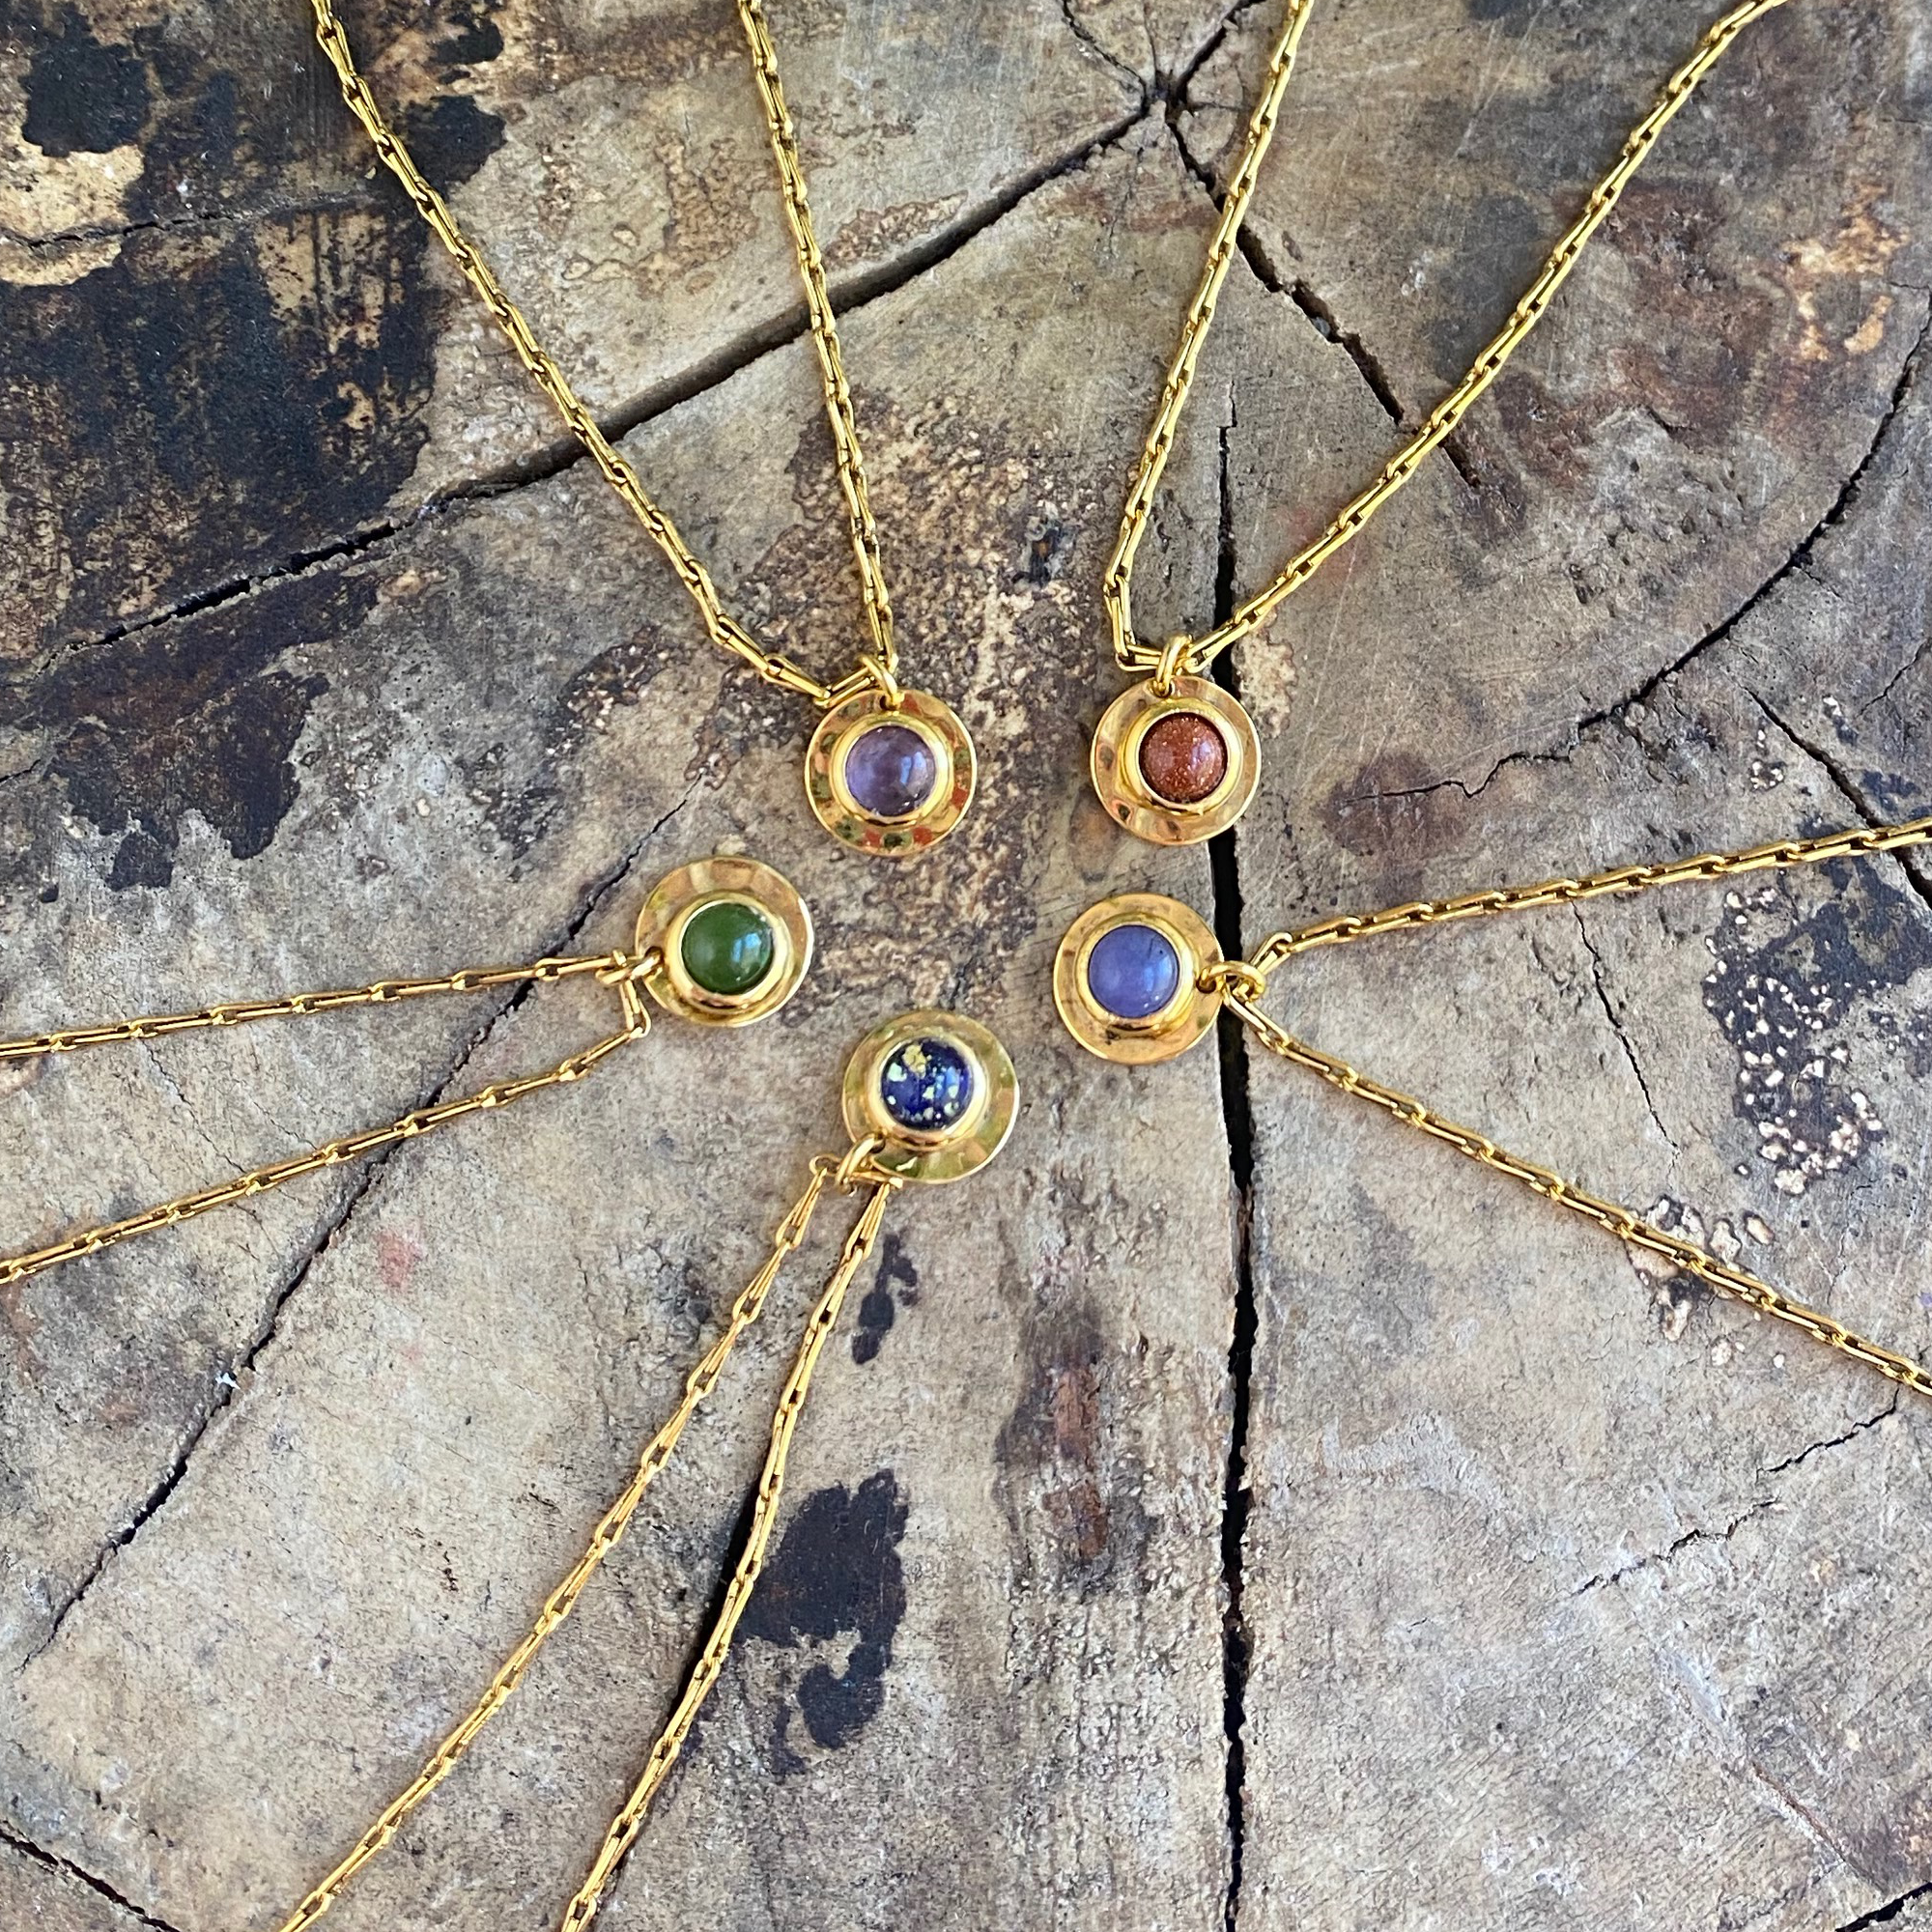 Planetary Necklace